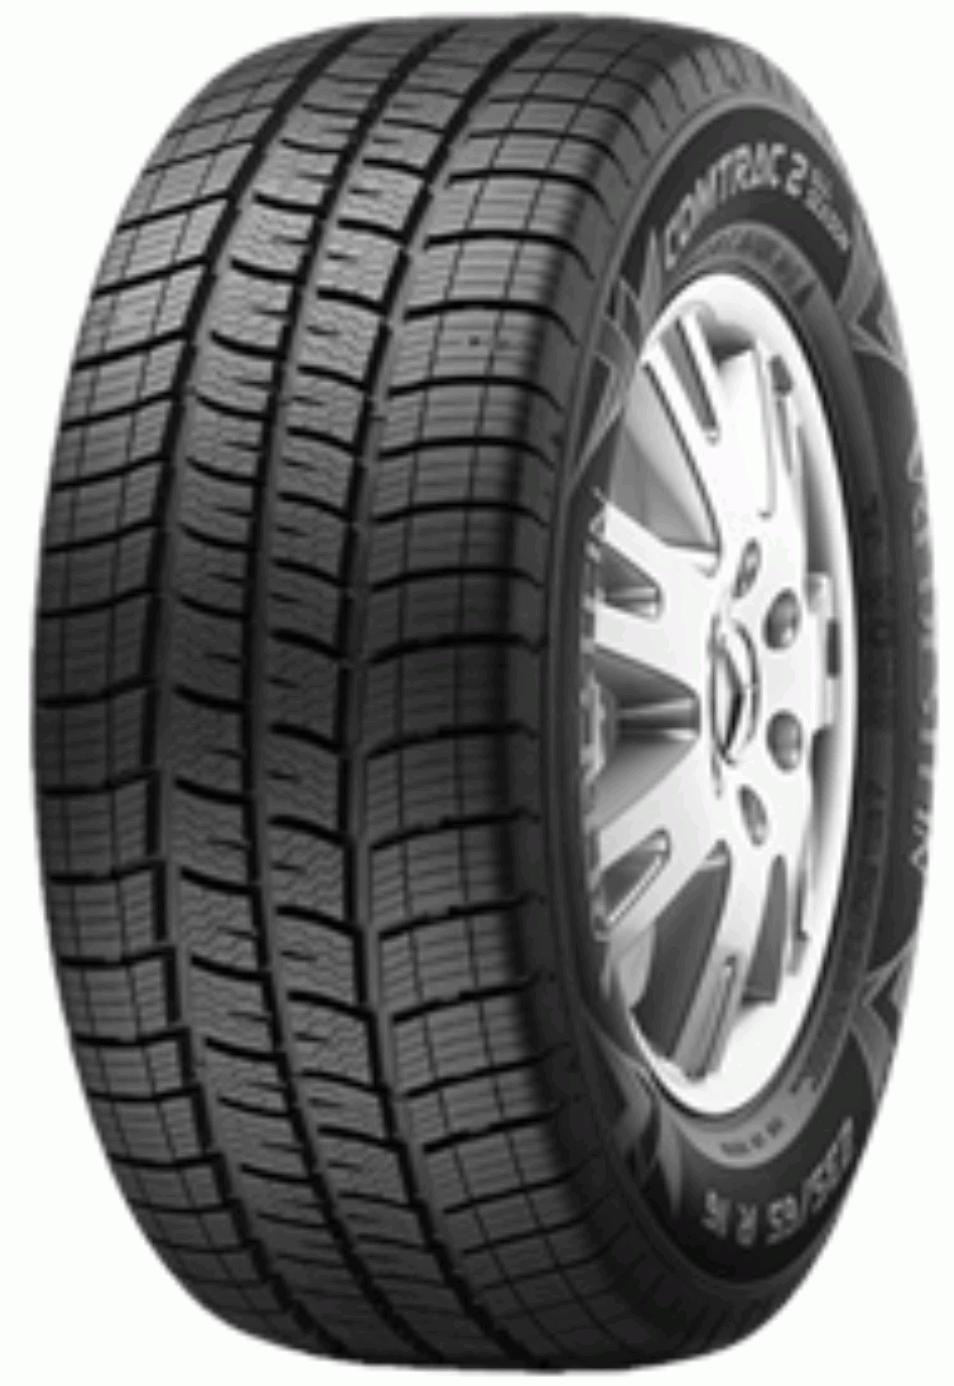 Vredestein Comtrac 2 All Season - Tyre Reviews and Tests